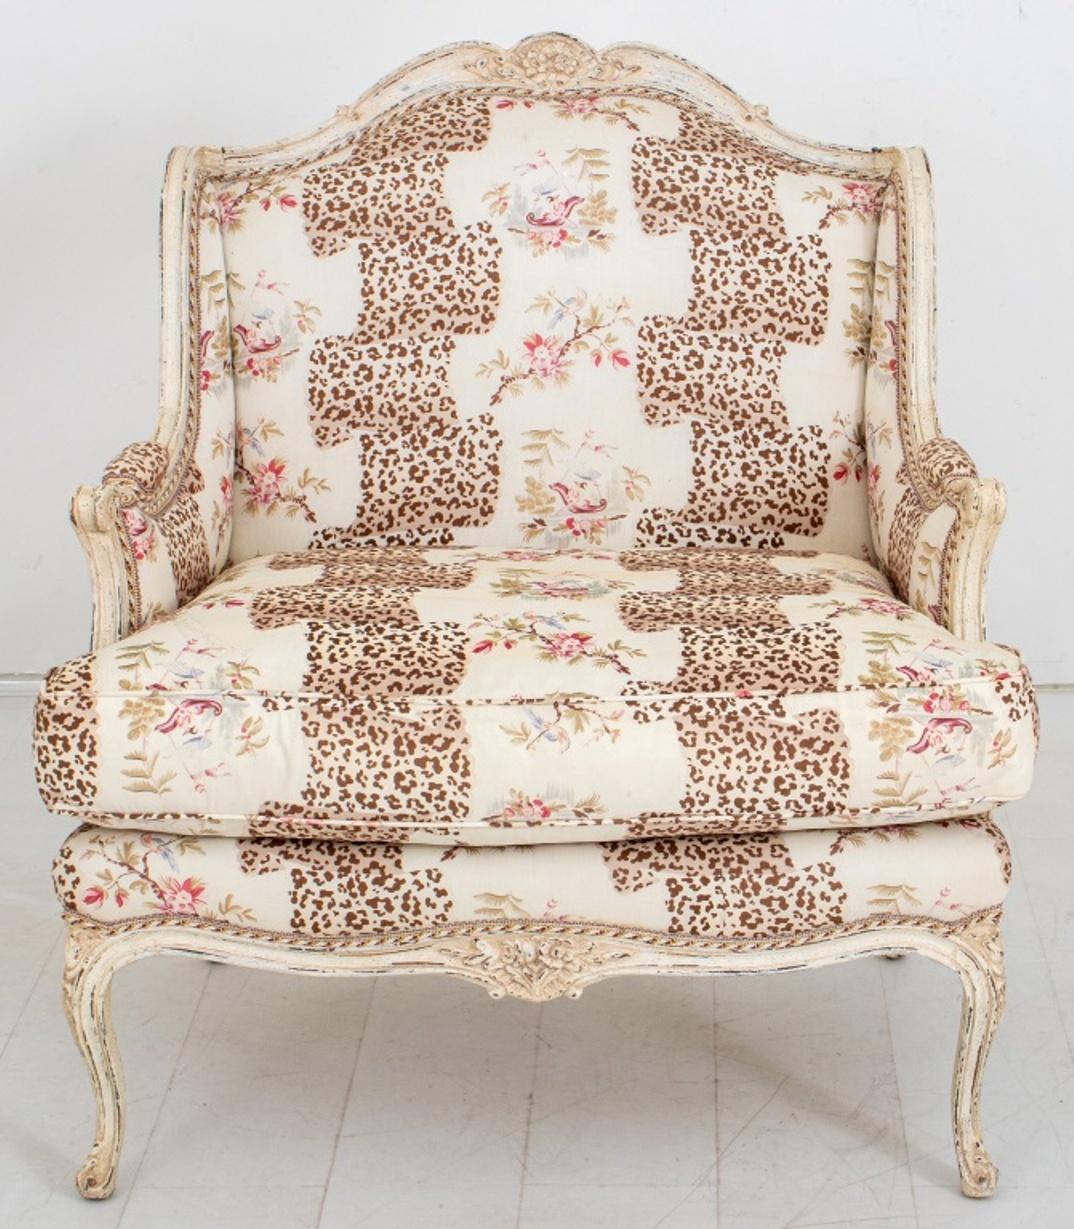 French Louis XV style bergere arm chair and footrest stool, with white painted wood frames and leopard print upholstery.

Dimensions for Chair: 39.5